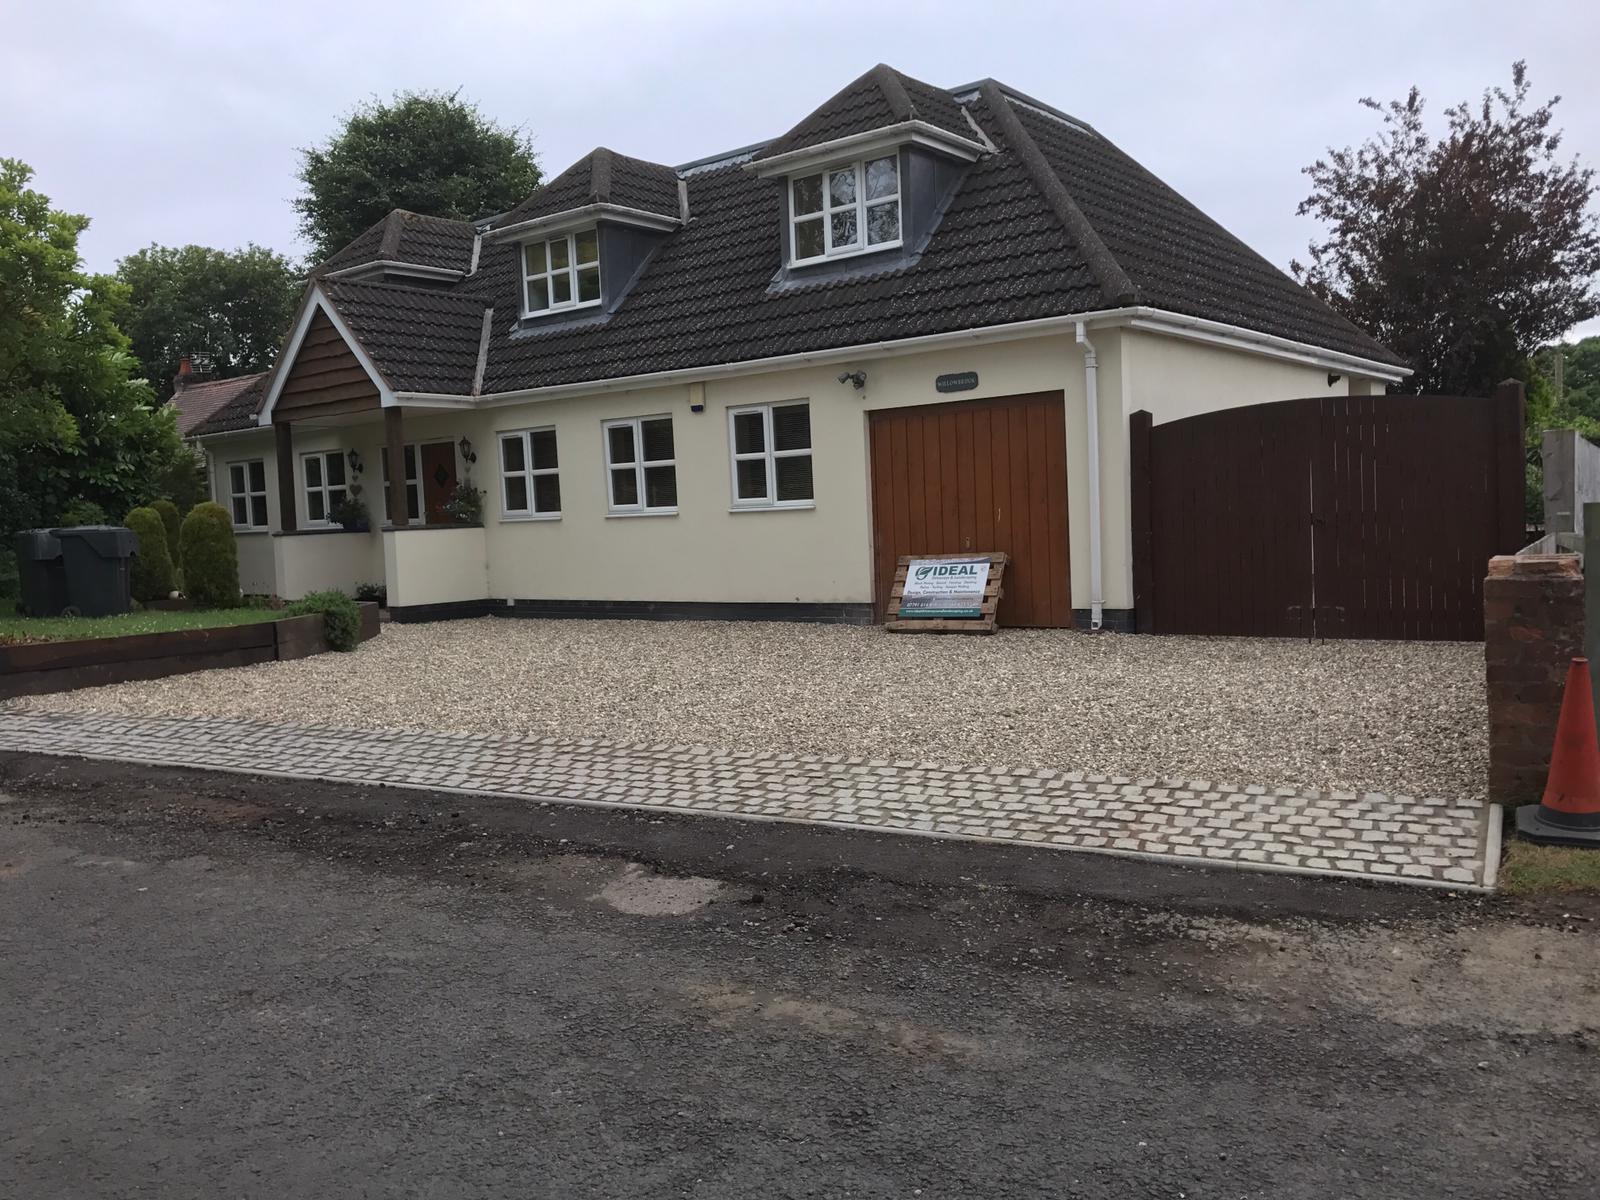 Paving and Driveways in Selly Oak, West Midlands - Thomson Local